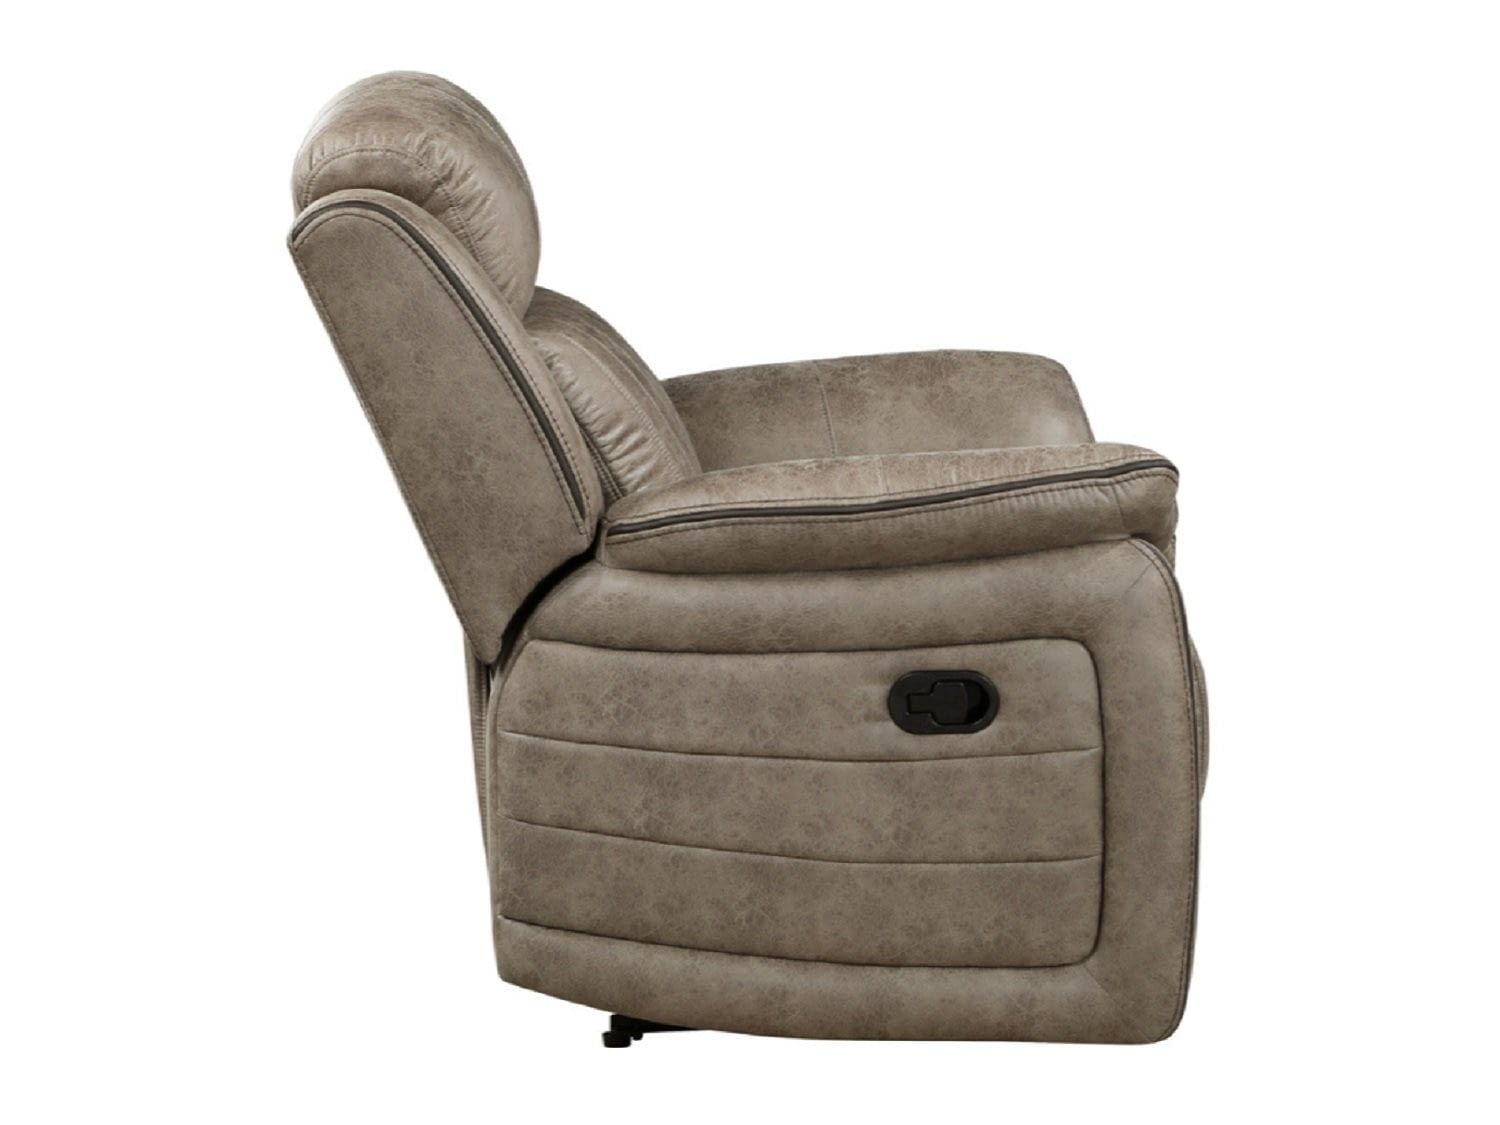 FERNLY Recliner Chair - Side View